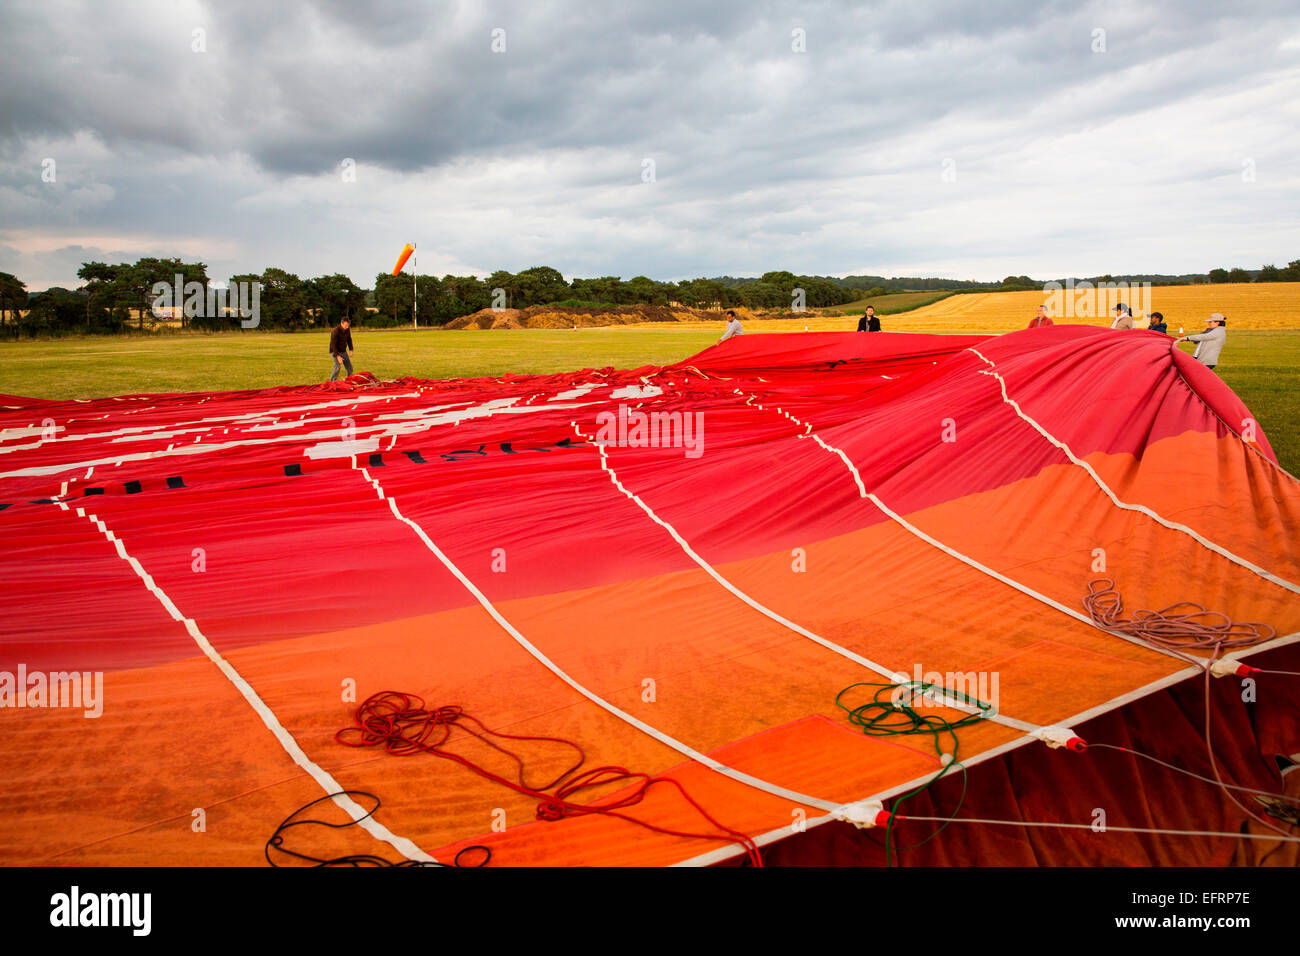 Crew unfurling red hot air balloon envelope on airfield, South Oxfordshire, England Stock Photo